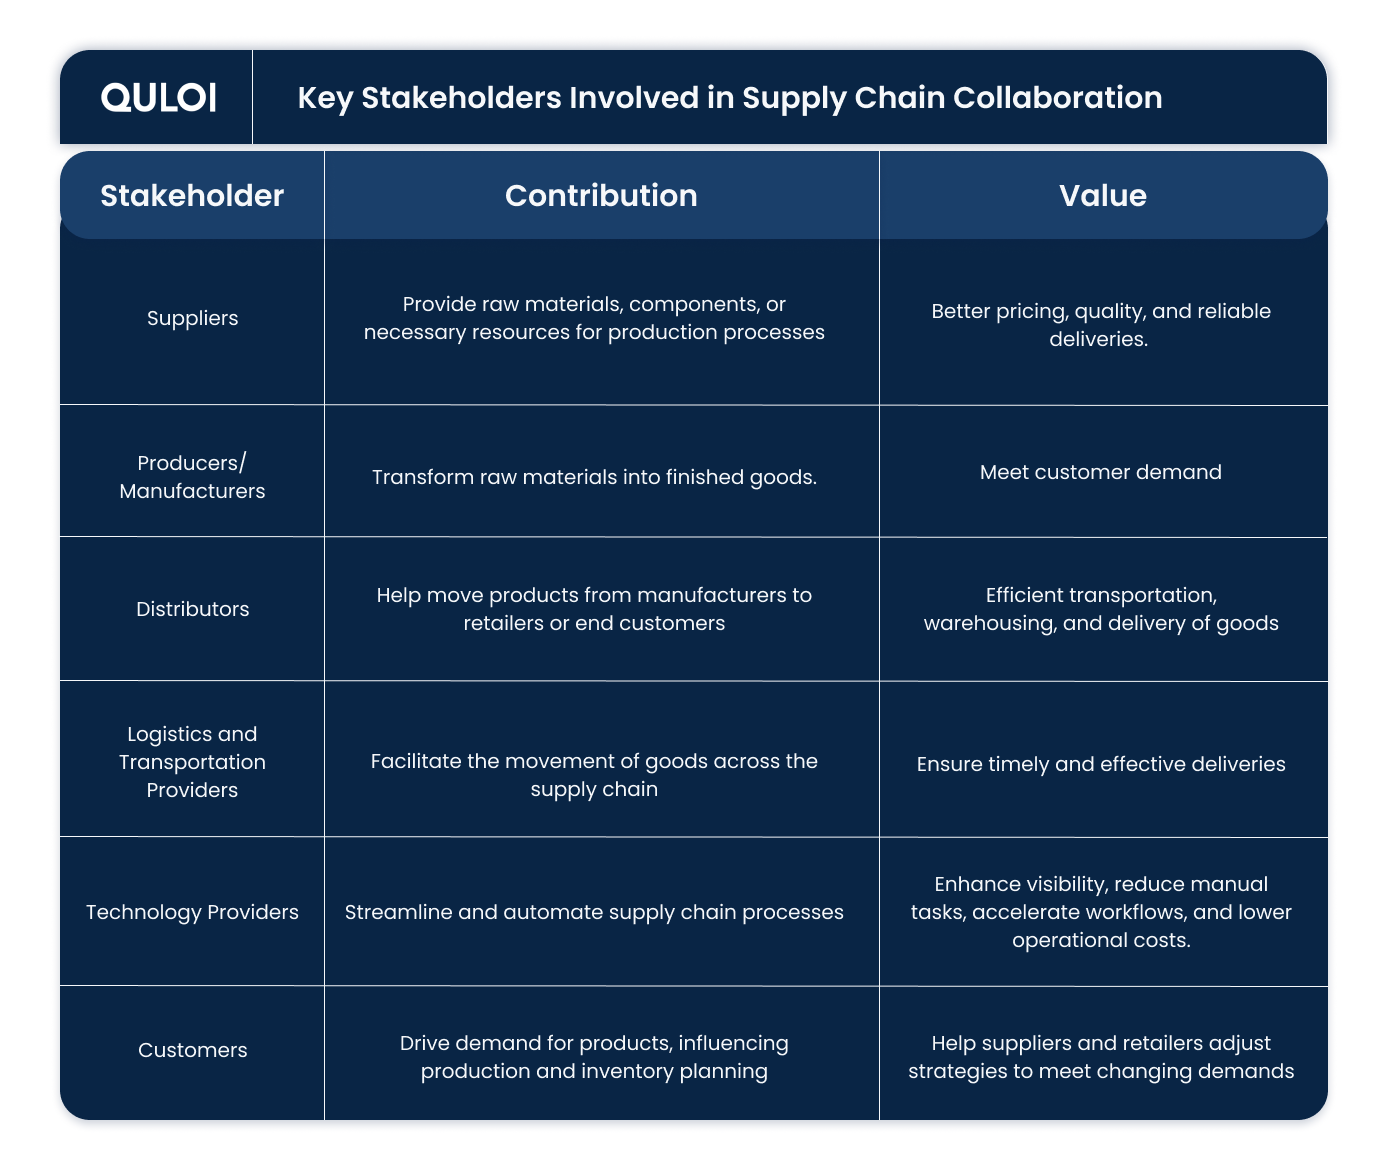 Table describing key stakeholders in supply chain collaboration